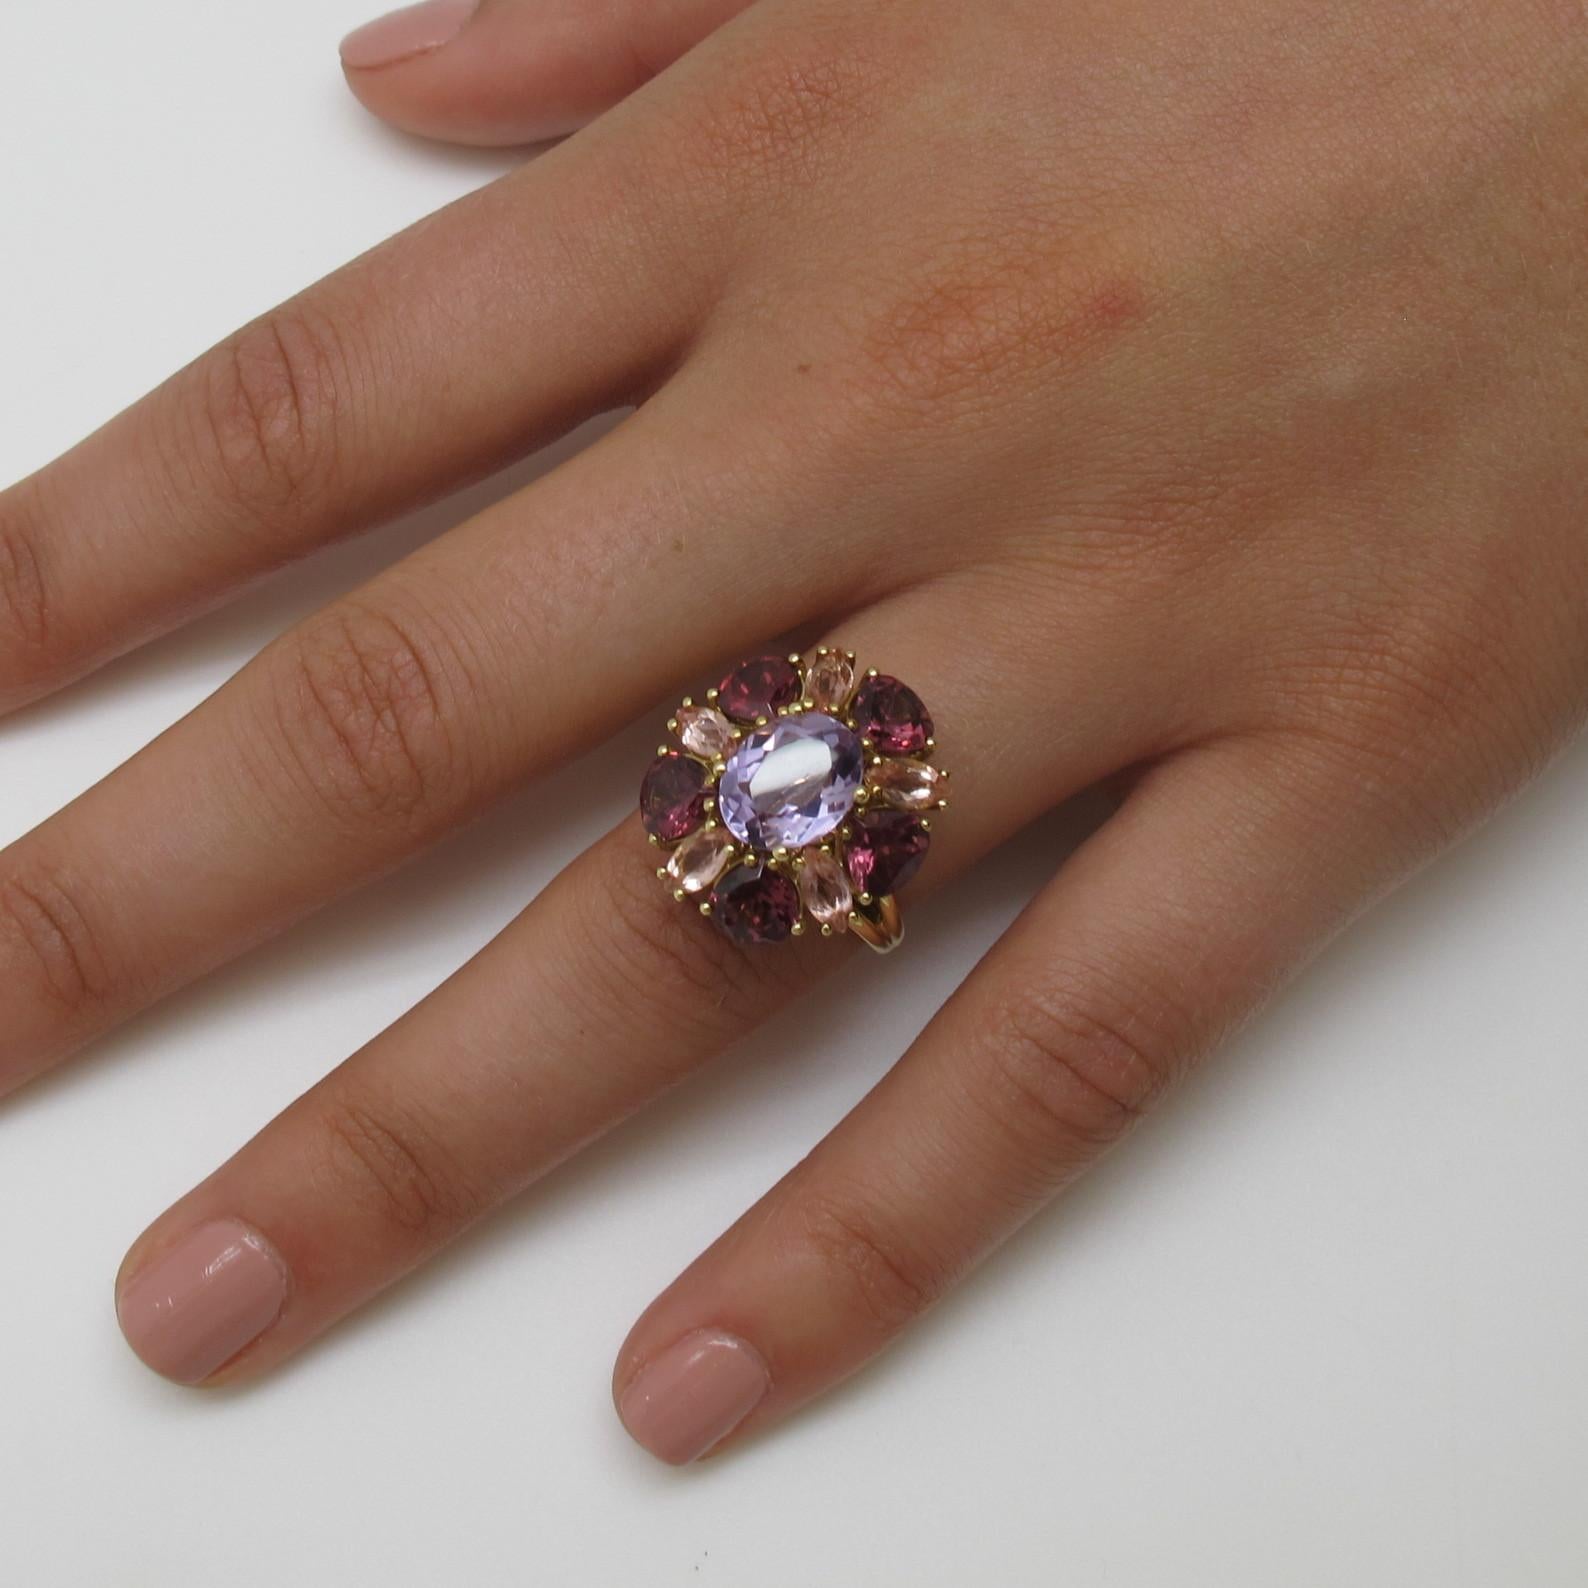 This blooming multicolored statement ring demands attention whenever worn! Its Rose de France amethyst measures 10.02x8.20x4.96mm (2.41 carats), set with 5 pear shape garnets (4.25 carats total weight), and 5 marquise cut topaz (1.55 carats total